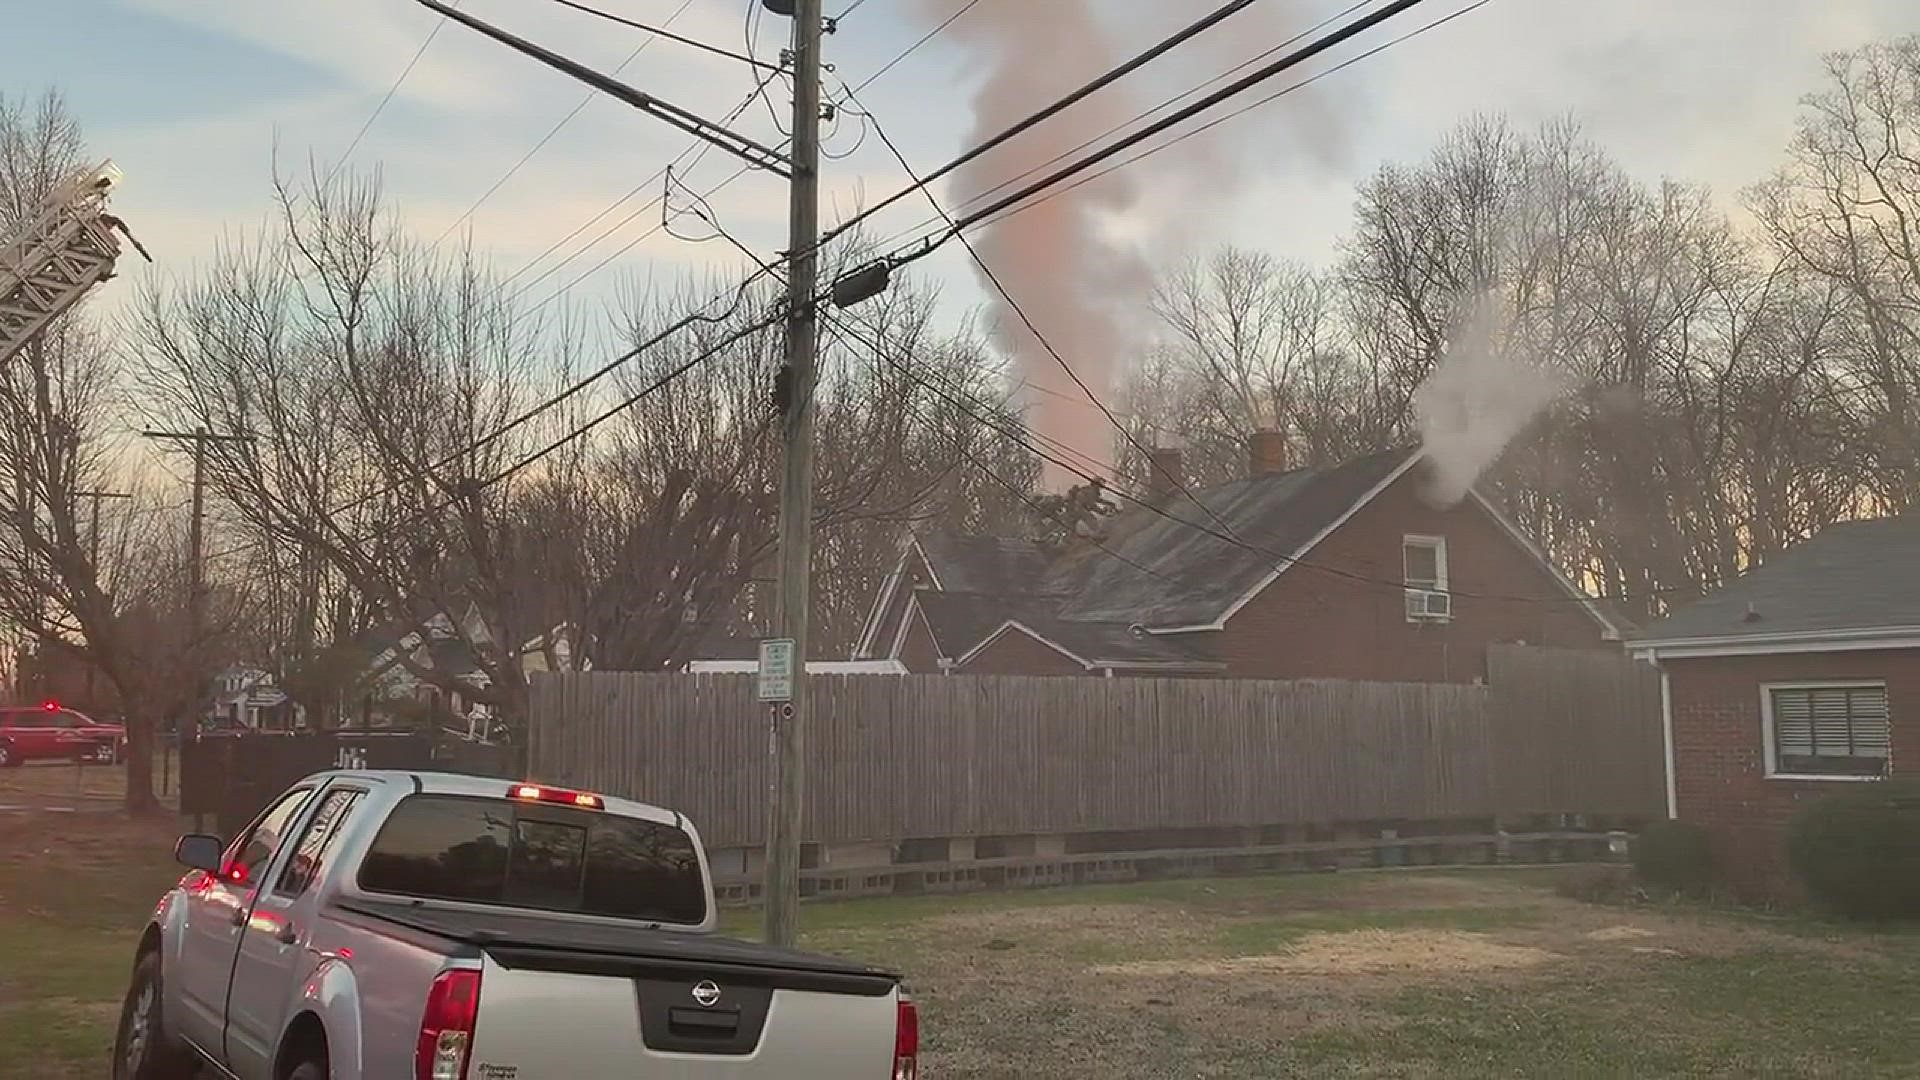 Winston-Salem fire crews confirmed that one person has died in the house fire.